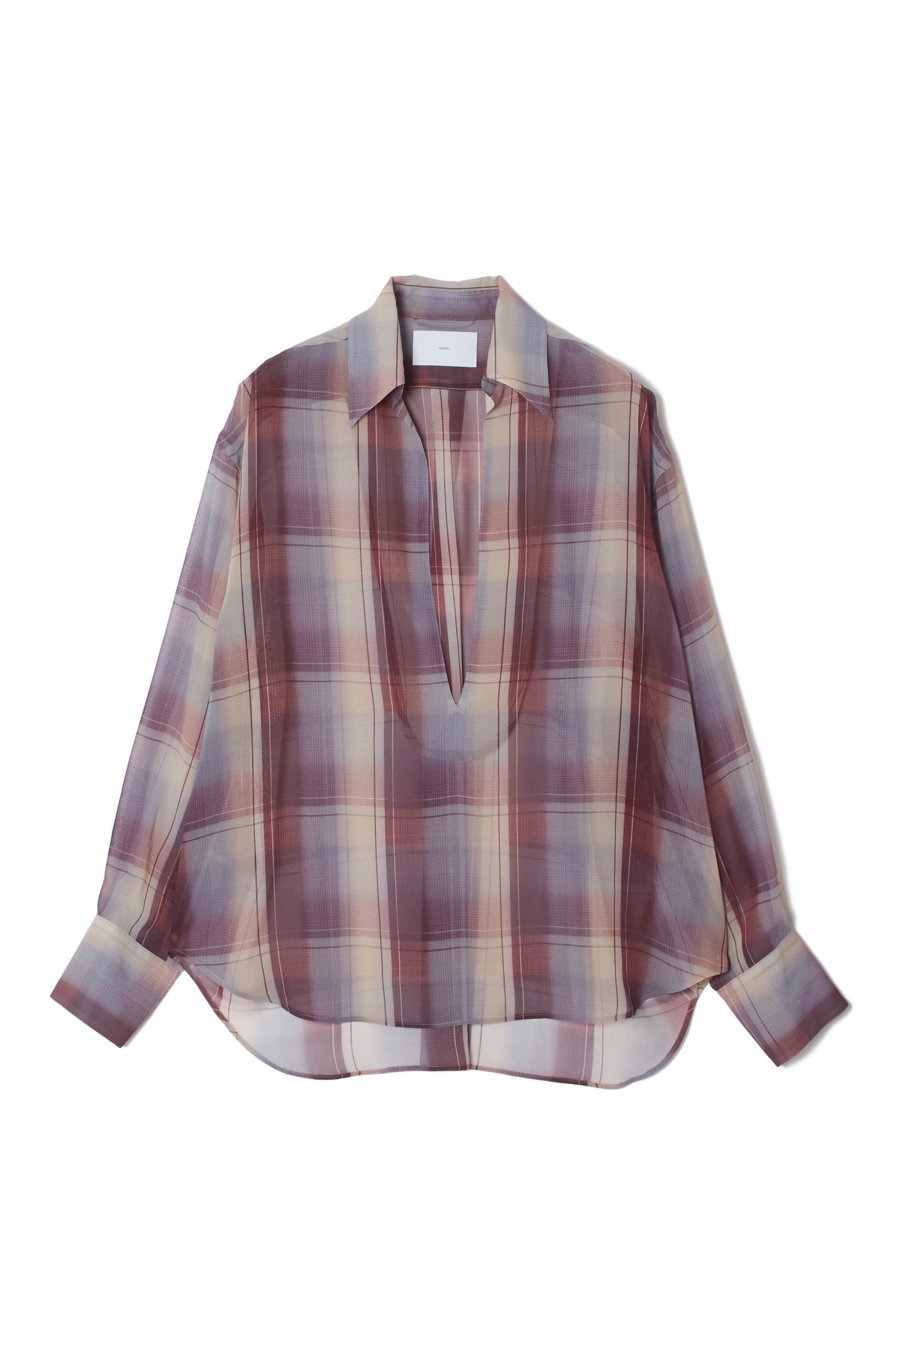 SUGARHILL  SHEER OMBRE BLOUSE(WINE ICE BLUE)<img class='new_mark_img2' src='https://img.shop-pro.jp/img/new/icons15.gif' style='border:none;display:inline;margin:0px;padding:0px;width:auto;' />